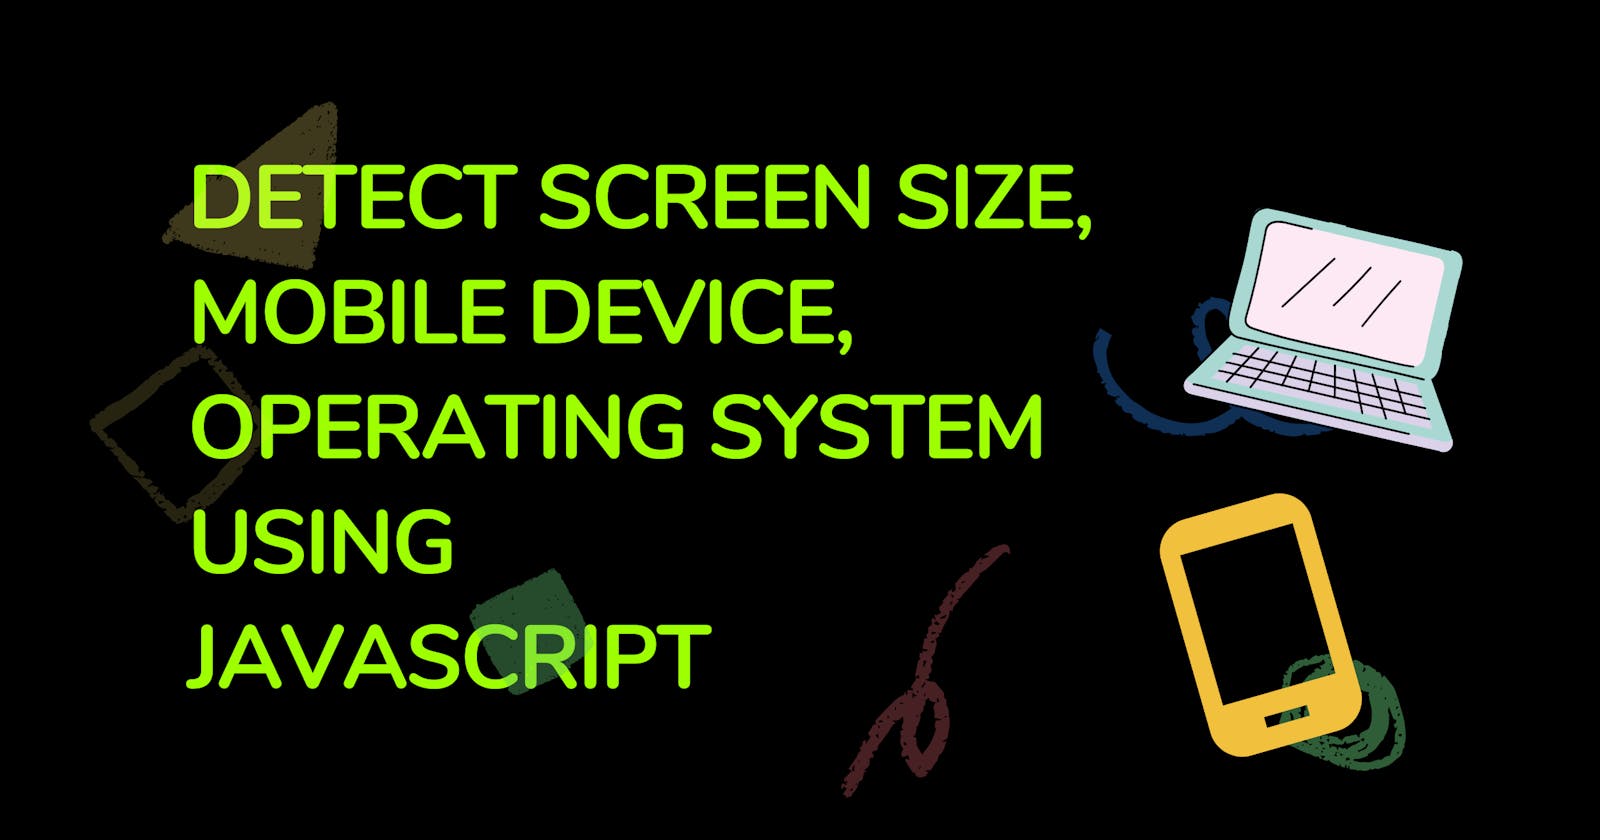 How To Detect Mobile Device, OS using JavaScript